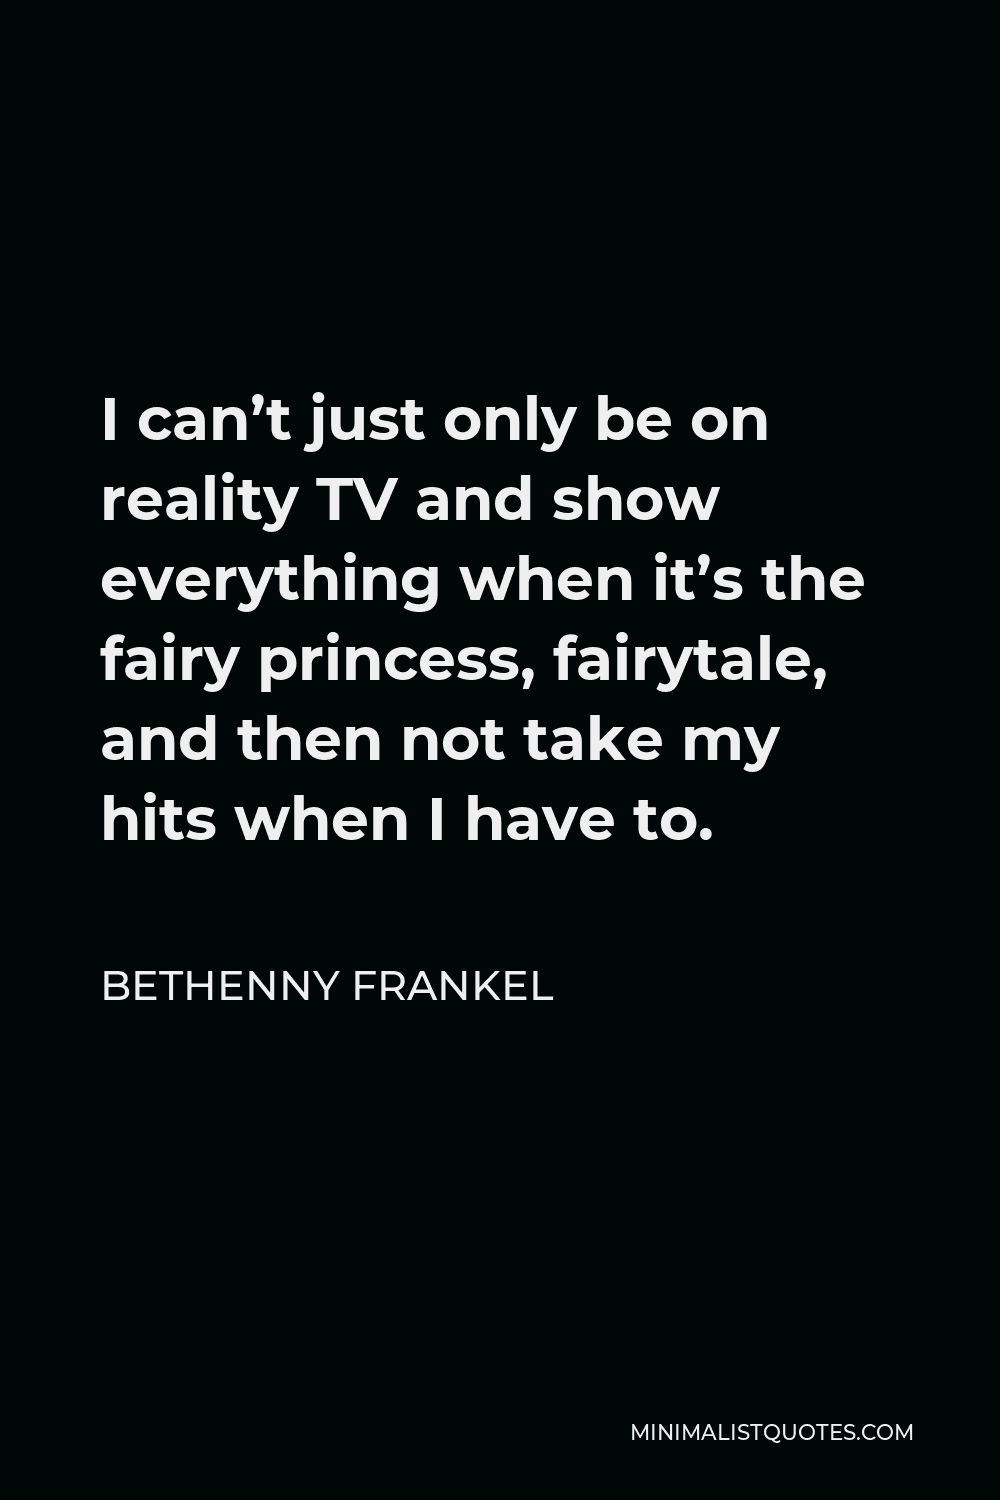 Bethenny Frankel Quote - I can’t just only be on reality TV and show everything when it’s the fairy princess, fairytale, and then not take my hits when I have to.